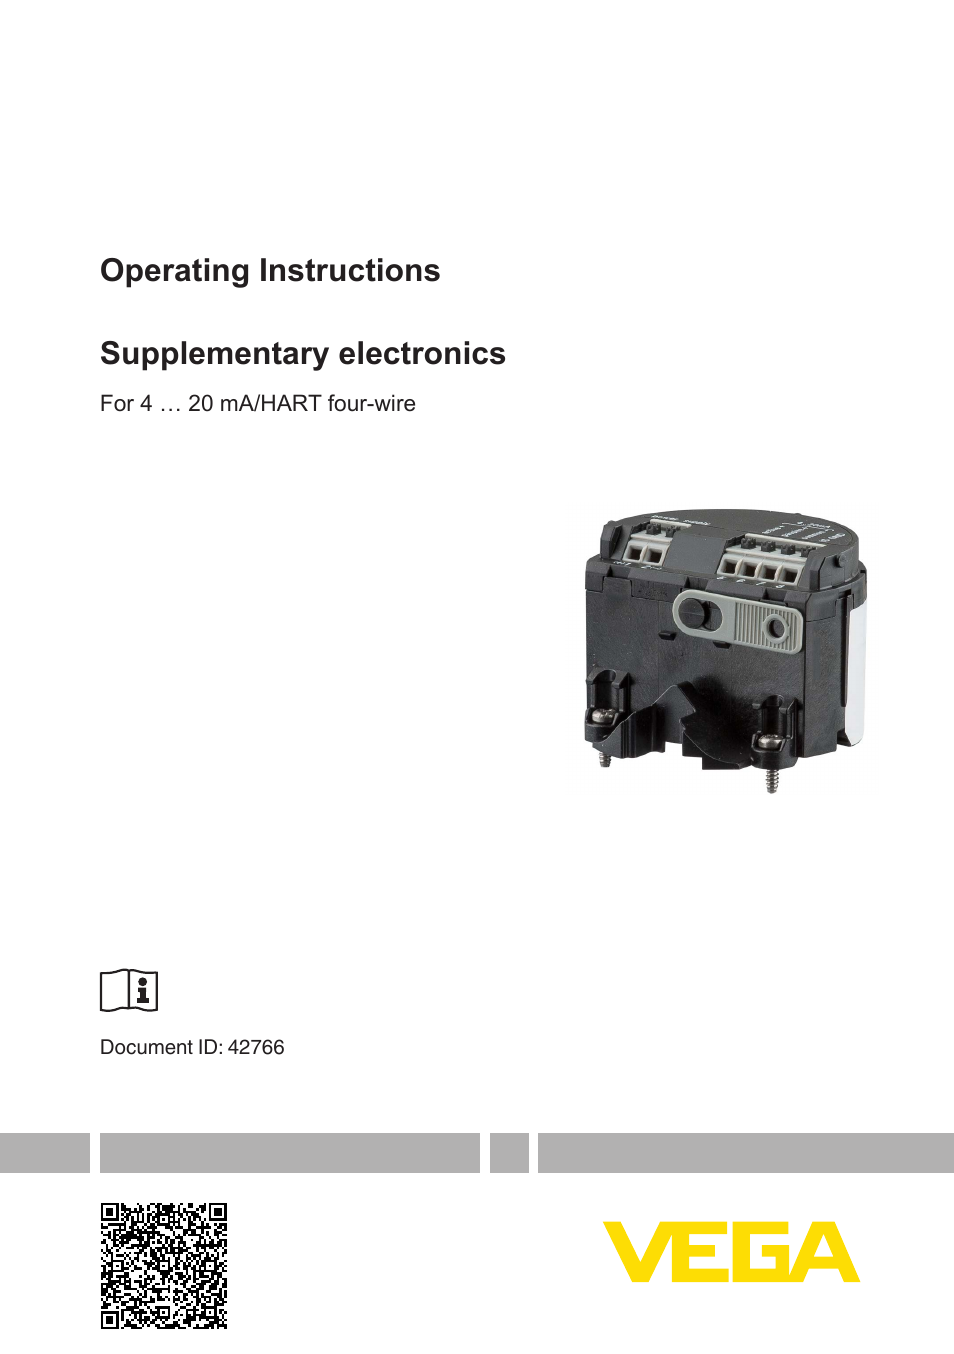 Supplementary electronics For 4 … 20 mA_HART four-wire